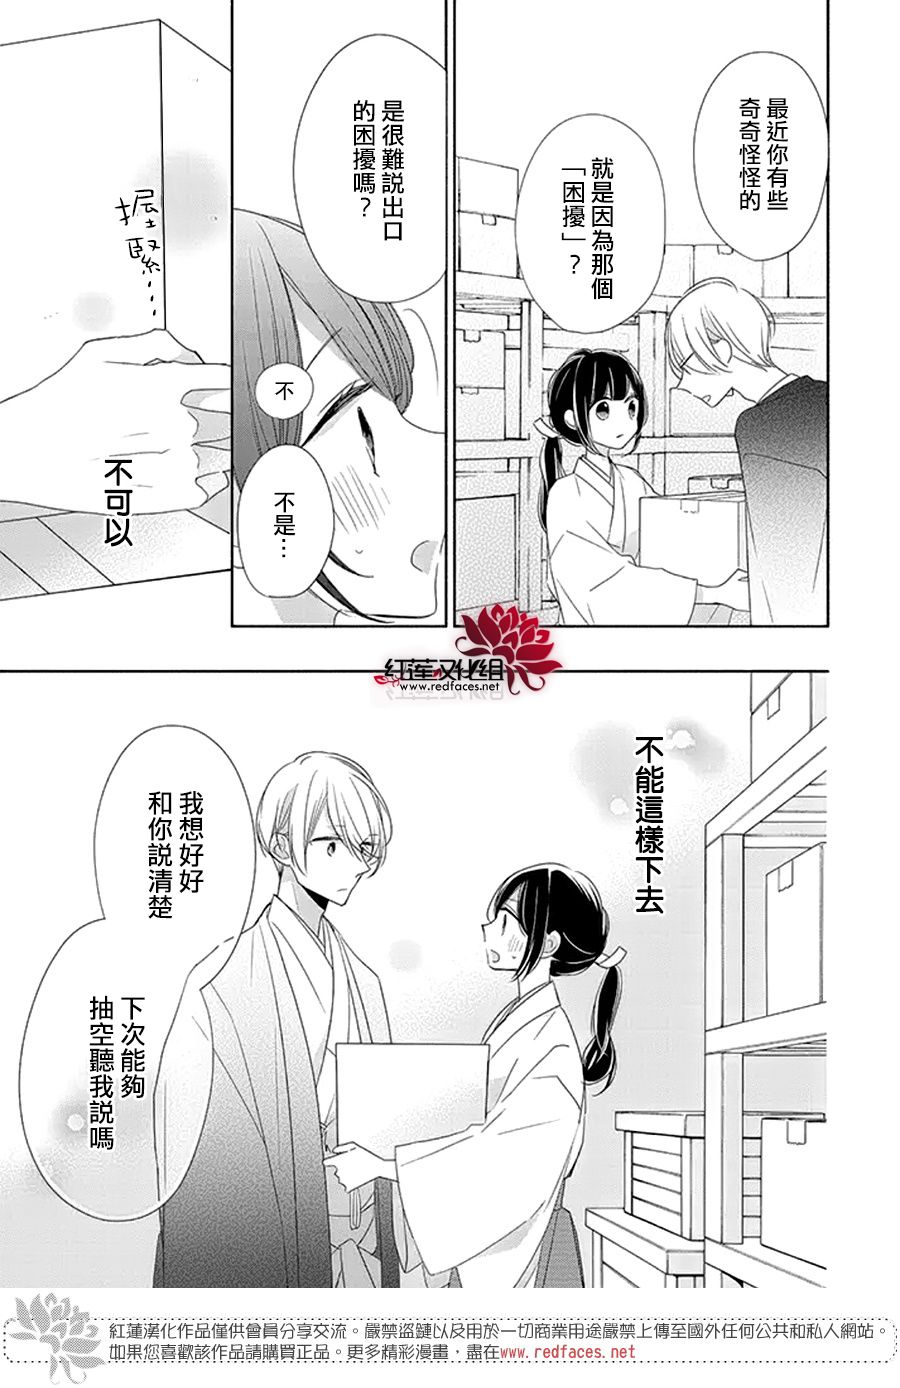 If given a second chance - 25話 - 5